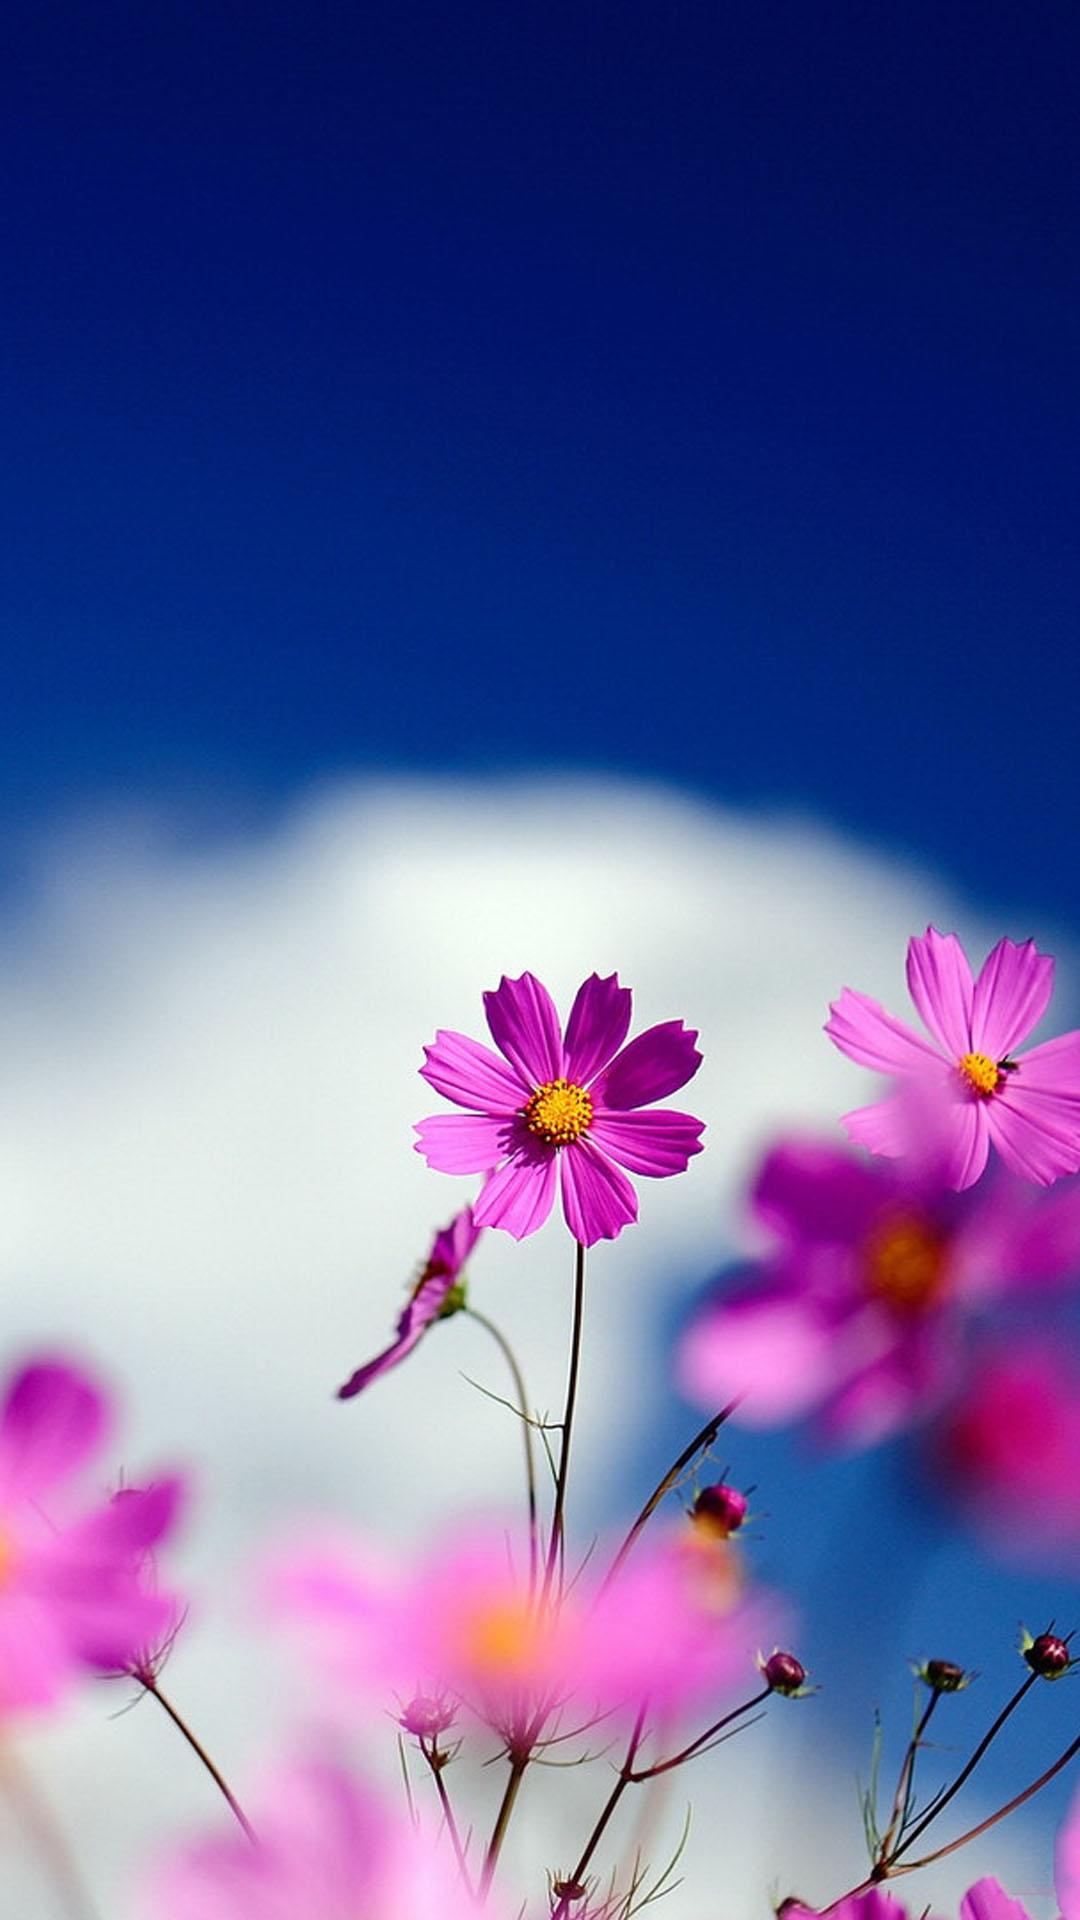 Flower 1080p Mobile Wallpapers - Wallpaper Cave